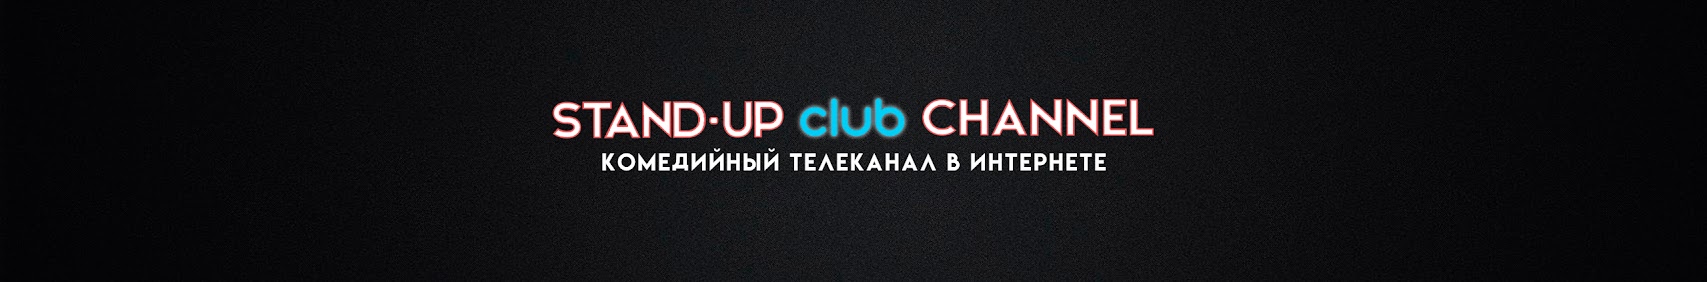 Stand-Up Club #1